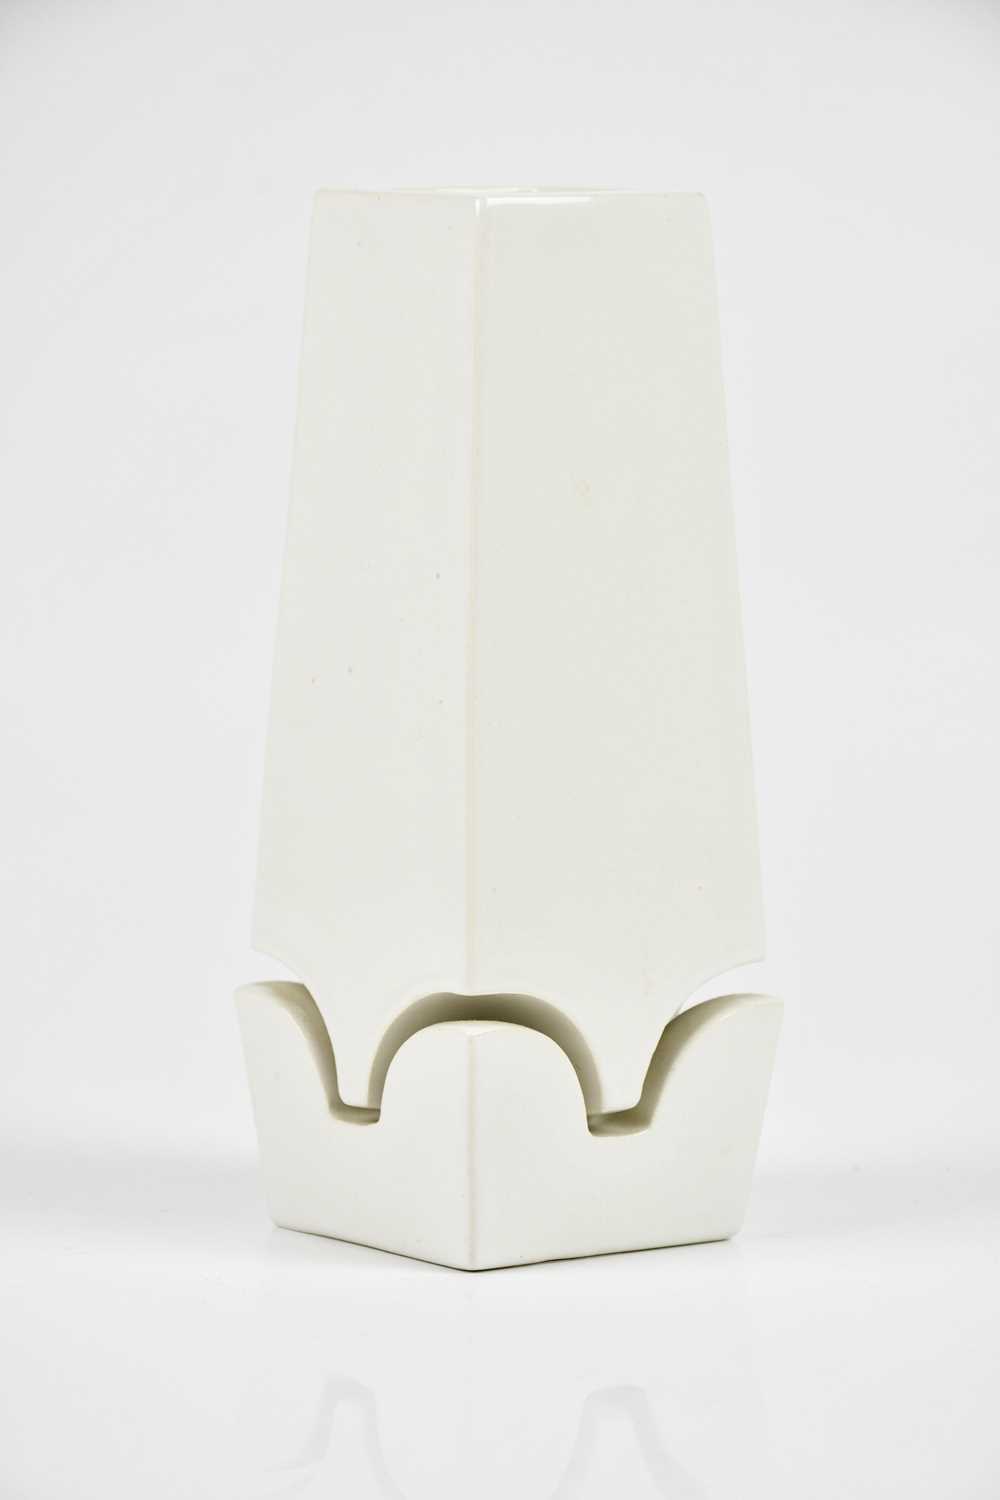 ALISON BRIGDEN FOR TROIKA POTTERY; a white glazed floating vase, signed Troika, with painted - Image 2 of 4